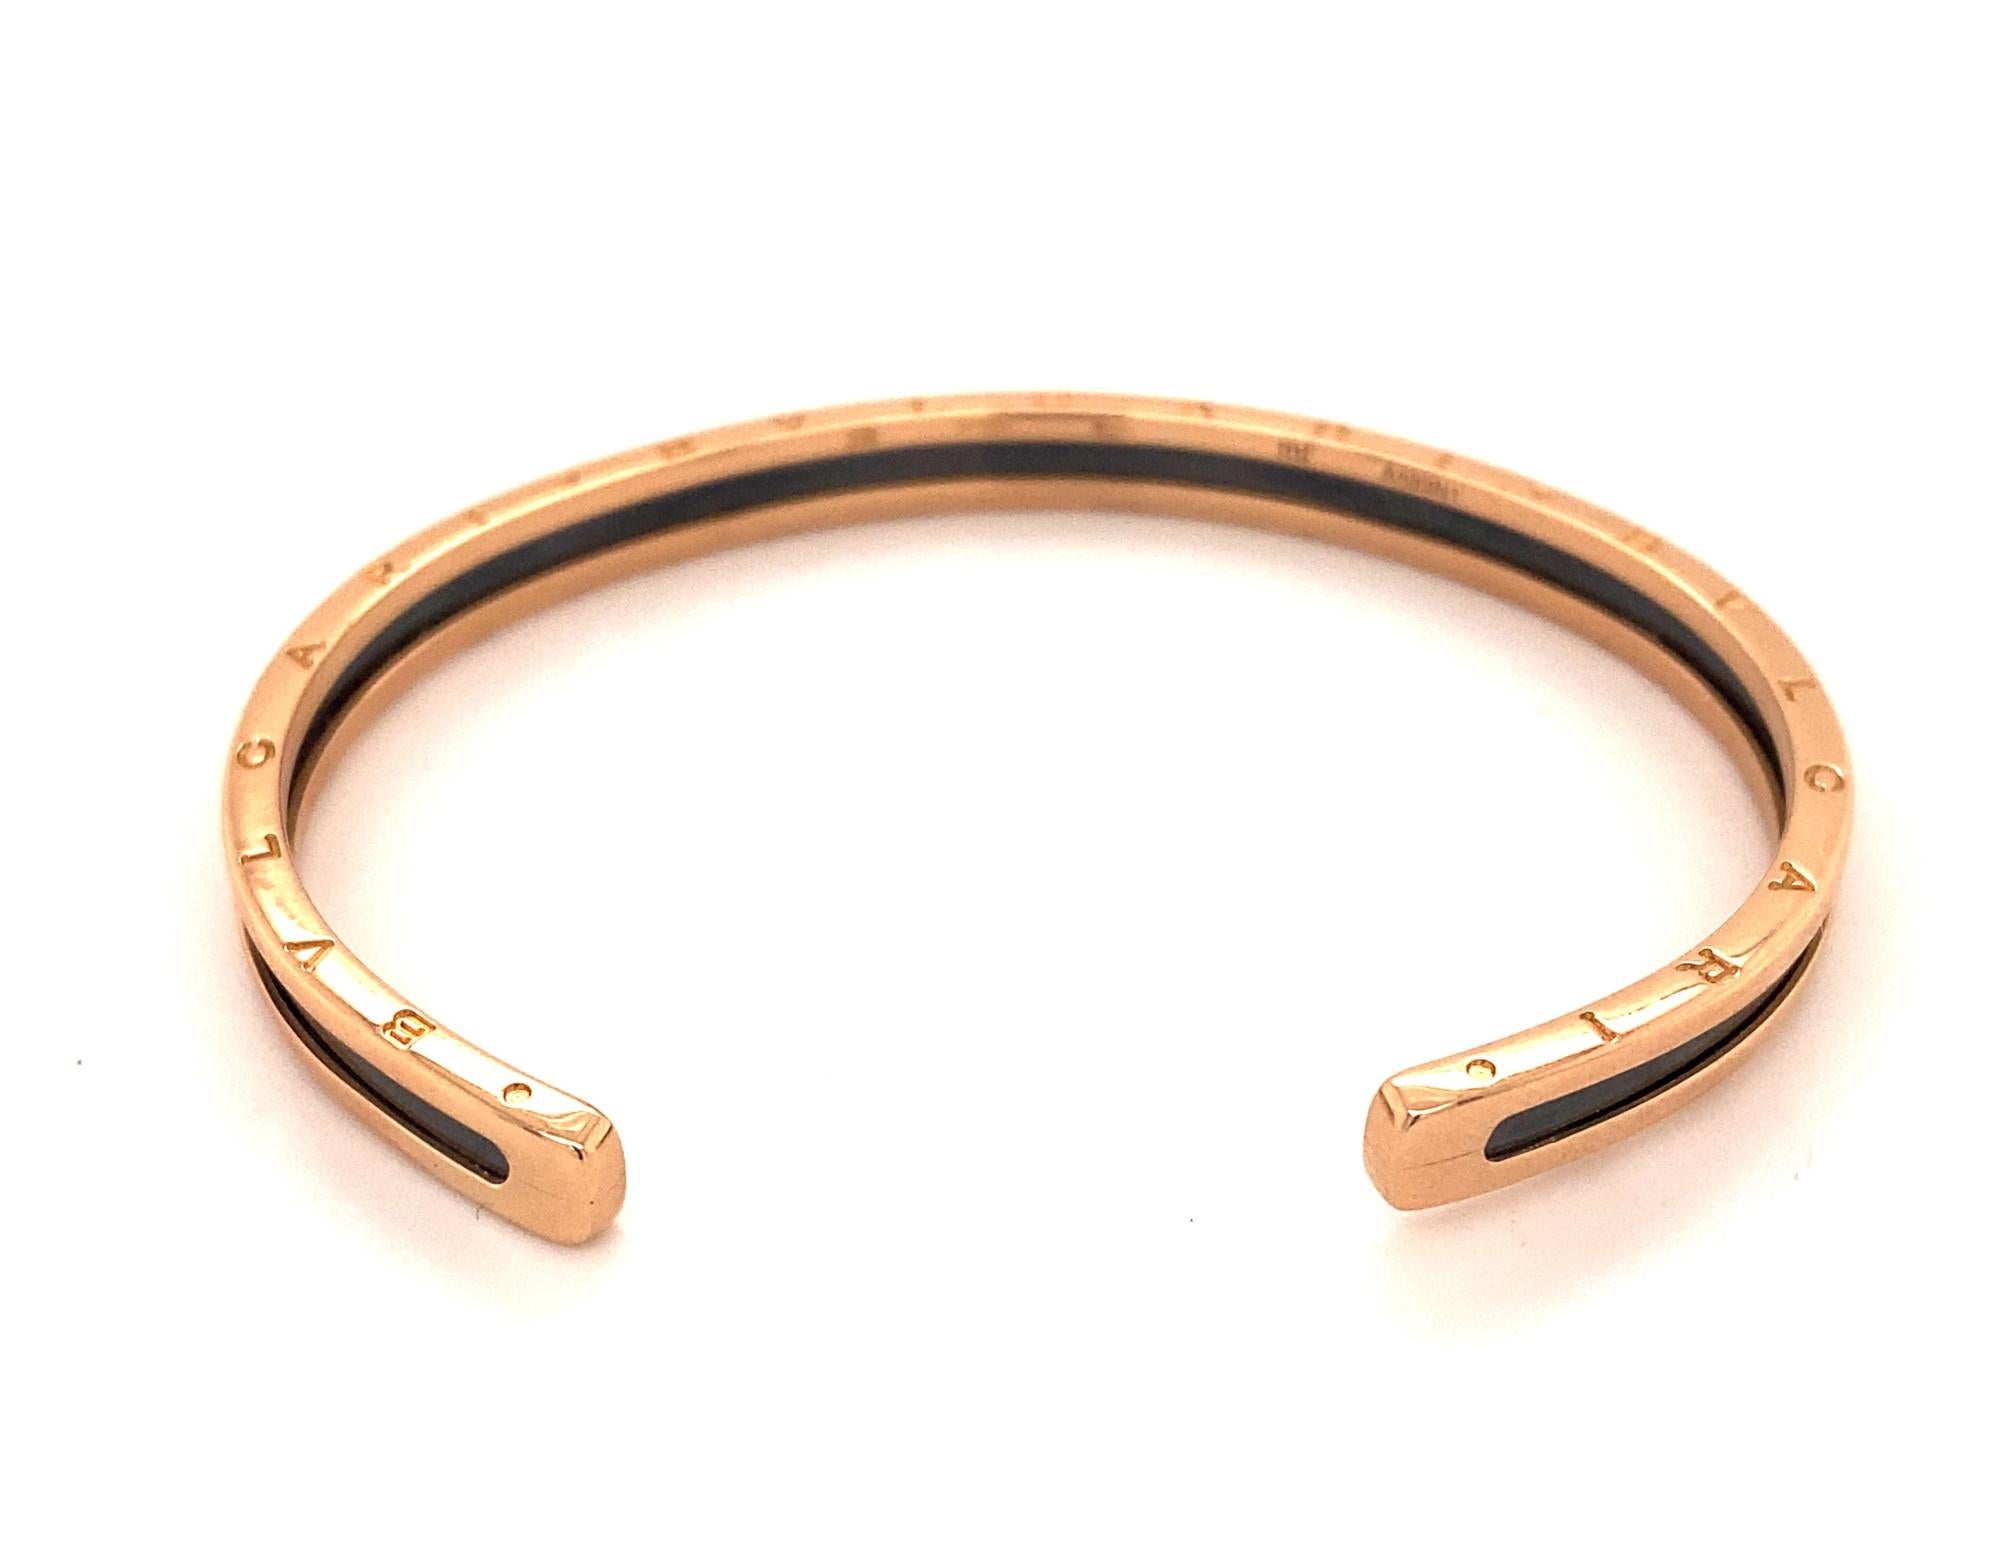 This is an authentic 18k rose gold and stainless steel bangle bracelet.  The model is the B-Zero style with rose gold on the outside and black stainless steel on the inside. Bangle is marked Made in Italy Bvlgari and numbered A589N1.  Bangle